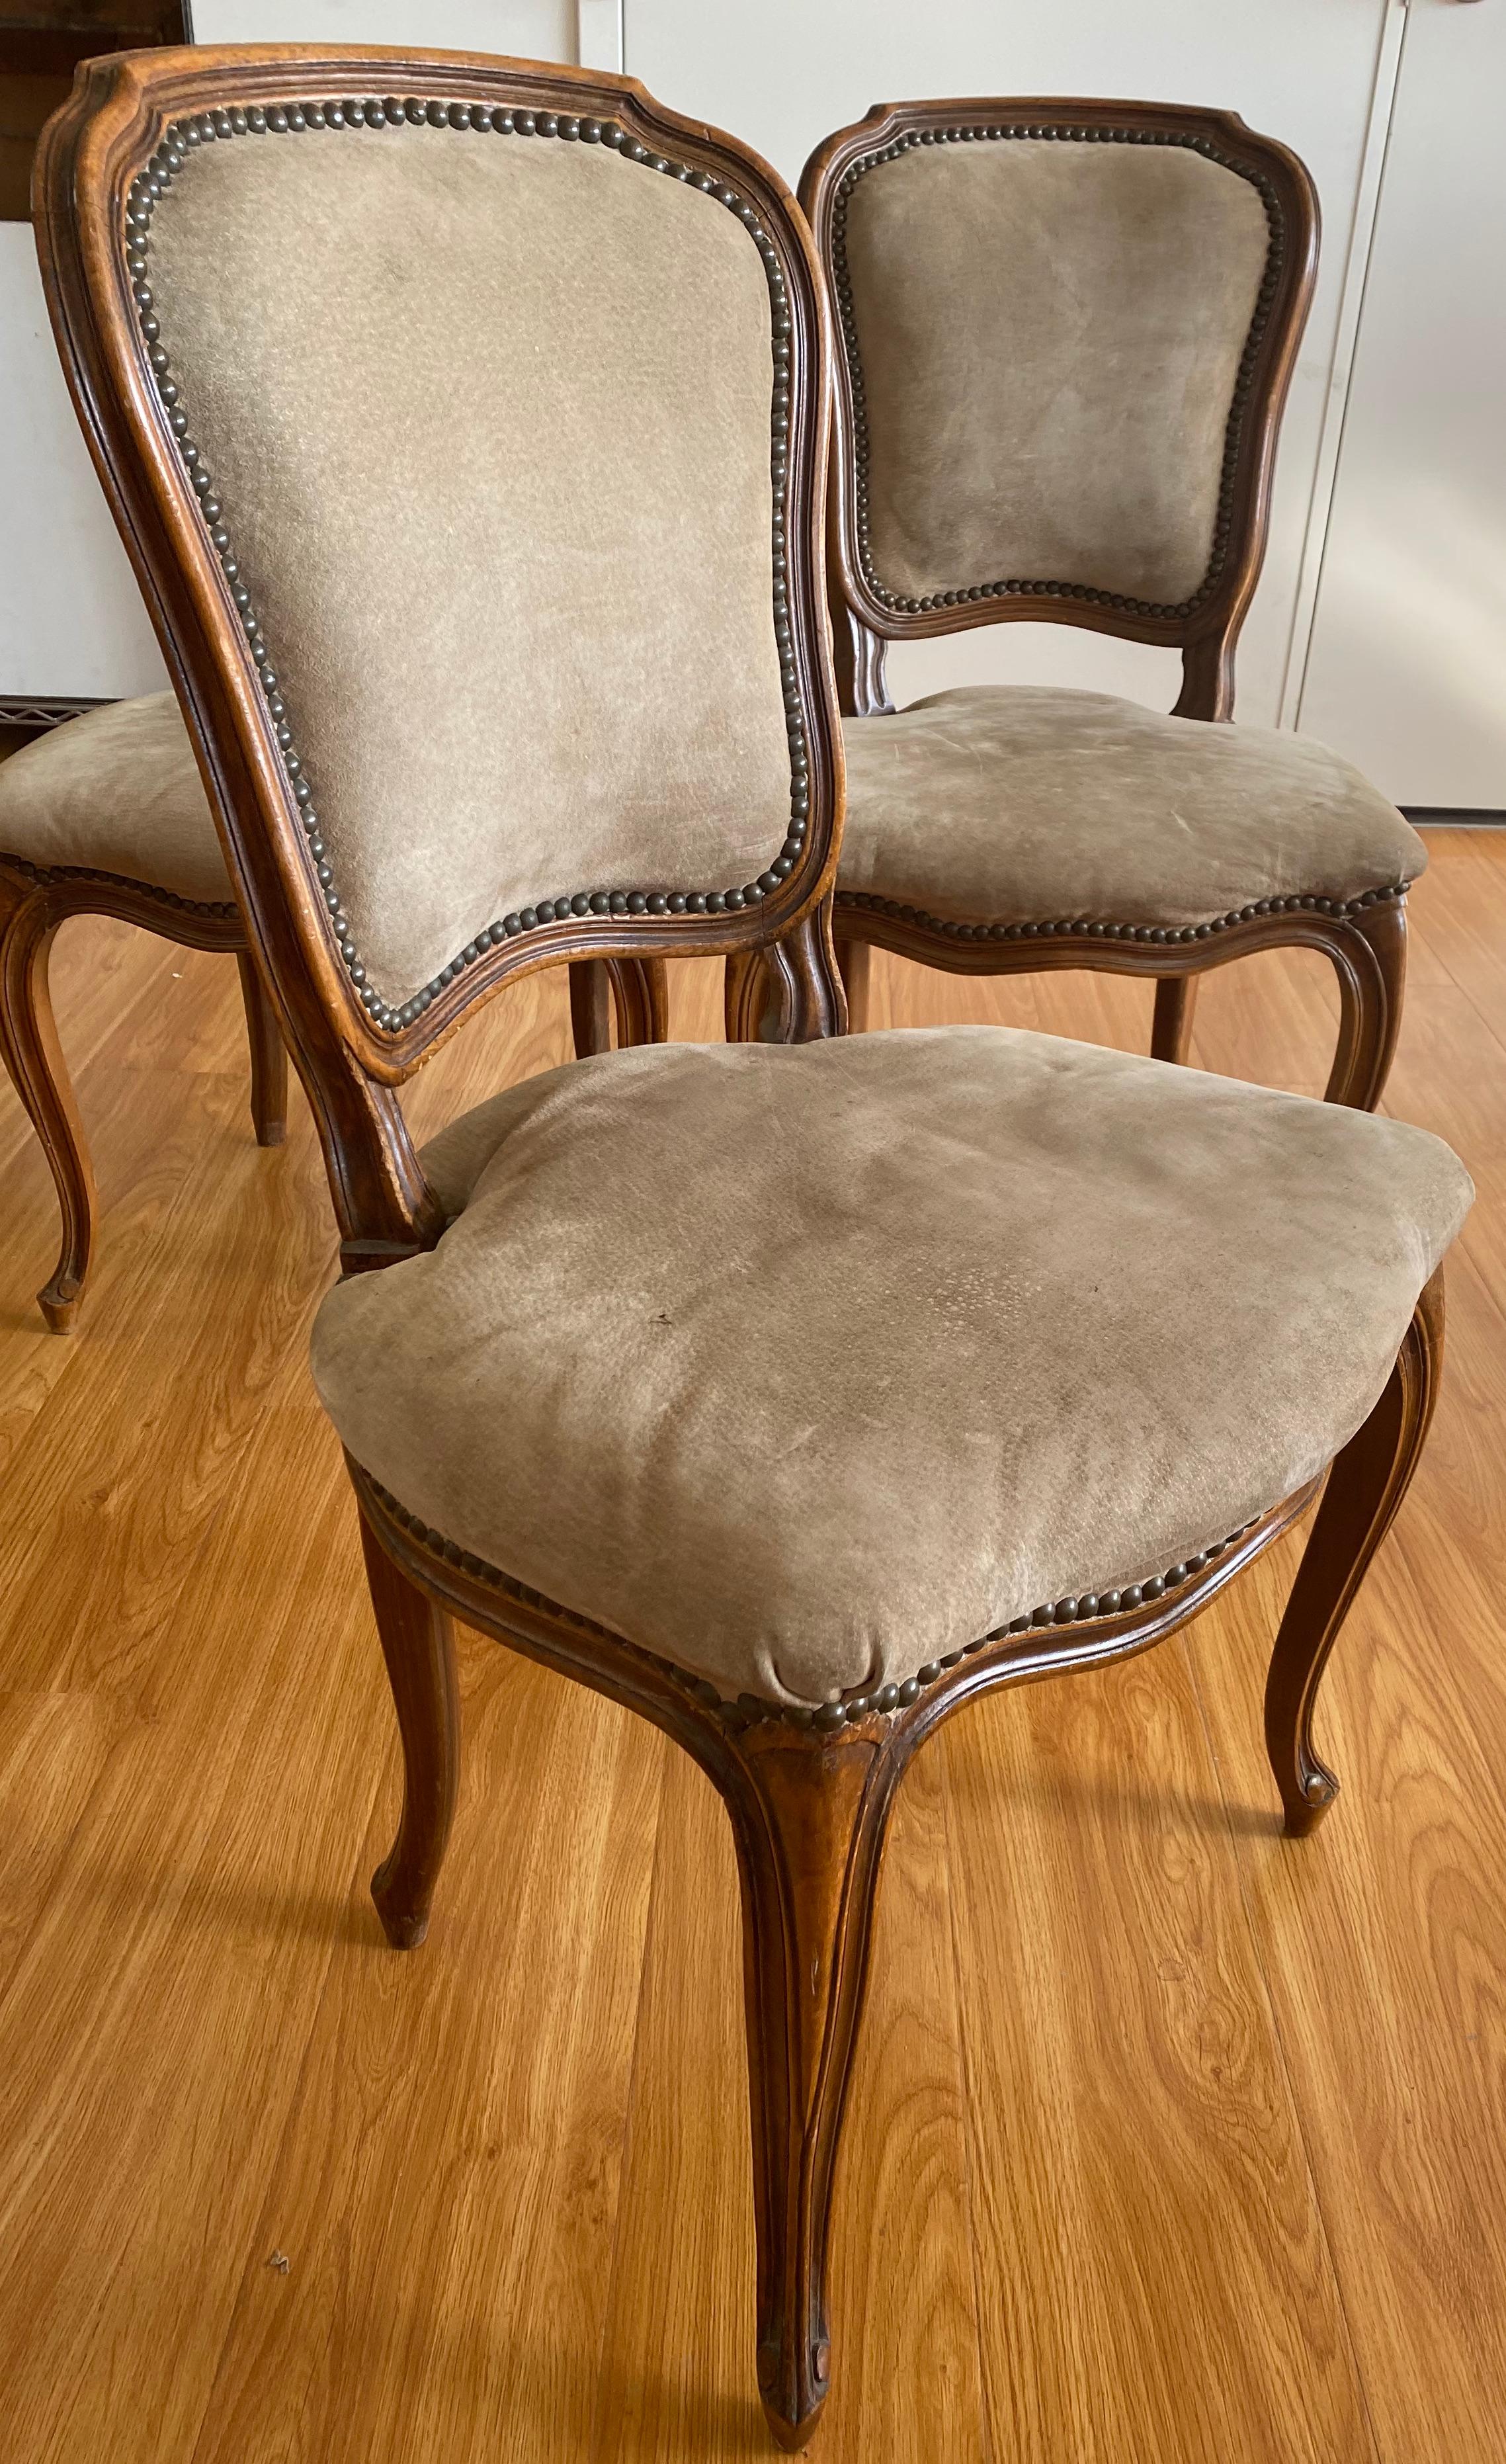 Three early 20th century French walnut carved side chairs, circa 1900
Classic French walnut side chairs. Each chair is carved from solid walnut. The chair are currently sporting a suede type covering with brass tacks

These chairs can be used 